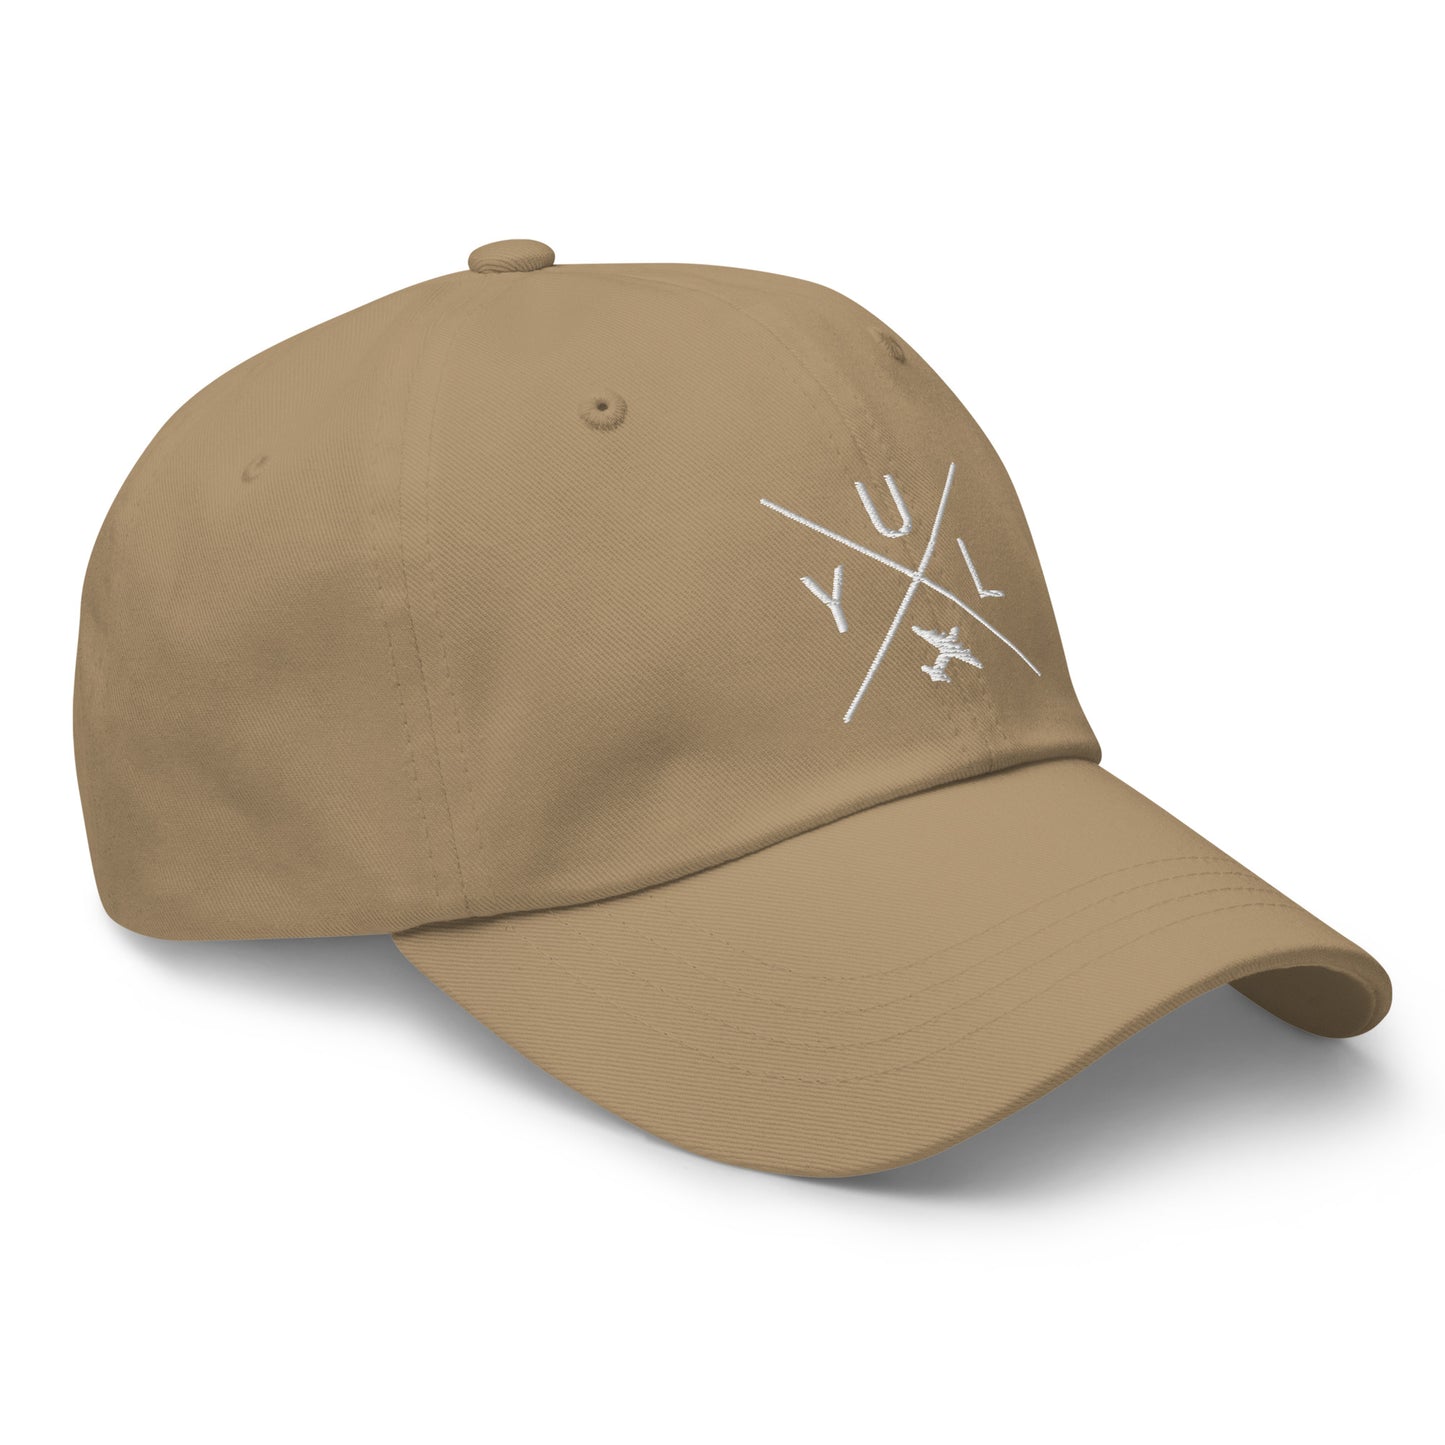 Crossed-X Dad Hat - White • YUL Montreal • YHM Designs - Image 16